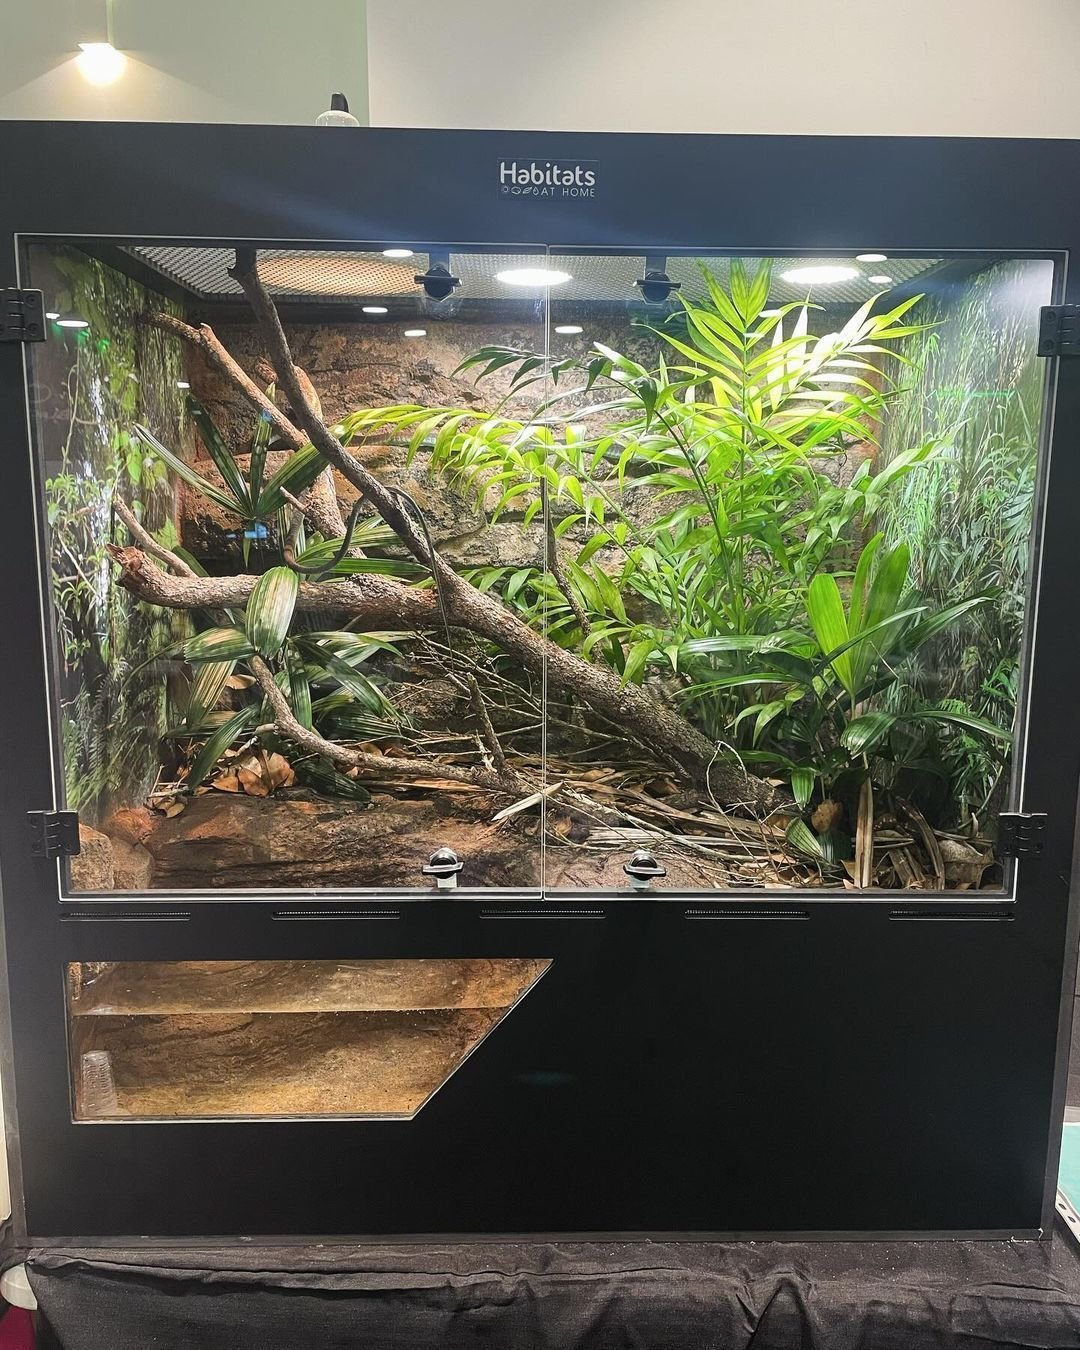 Scaping for snakes can be a real challenge given how destructive they can be, but @habitatsathome knows how it's done!

📸 Credit: @habitatsathome 

💬 DM or tag to be featured! #vivariumcollective

📘 Visit our website for vivarium articles, tips, a